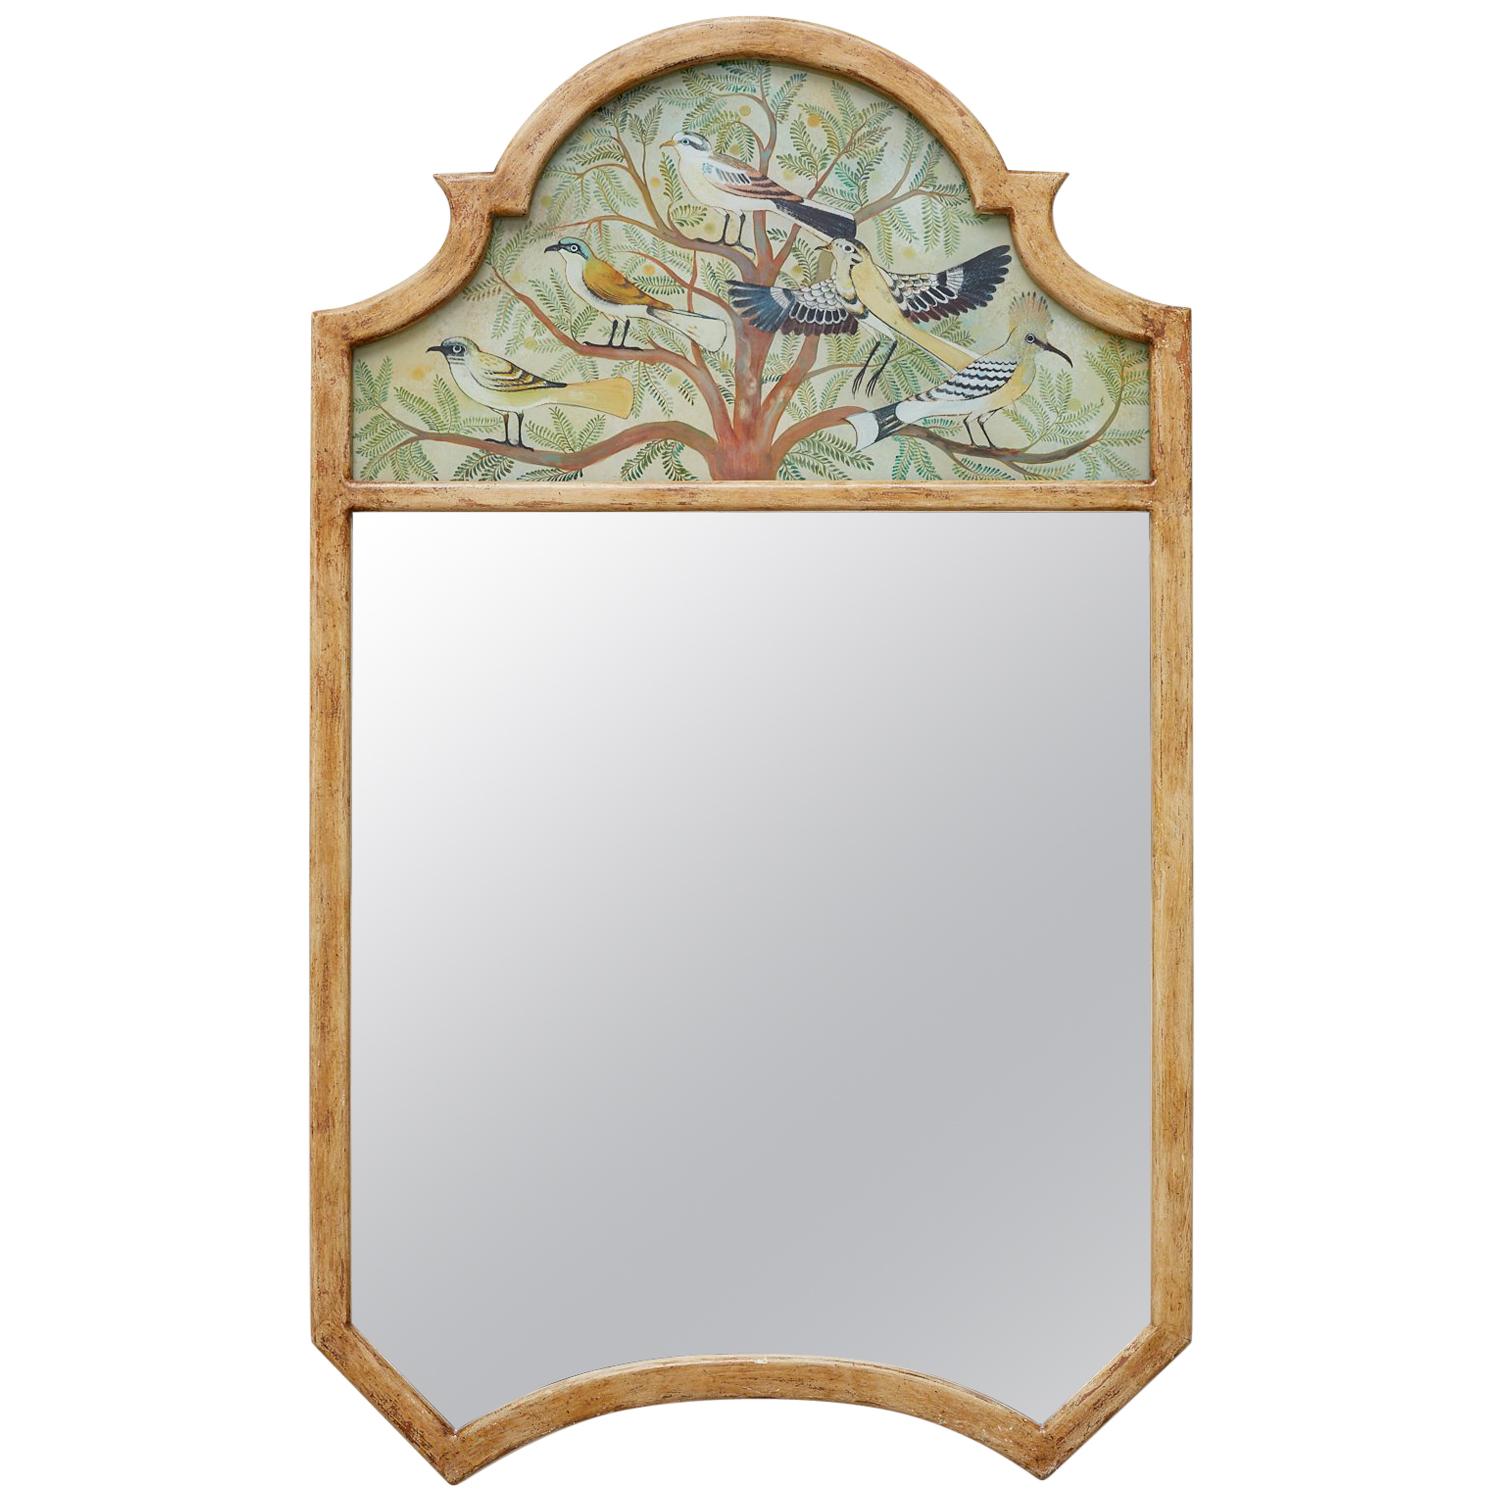 Chinoiserie Style Reverse Painted Trumeau Mirror